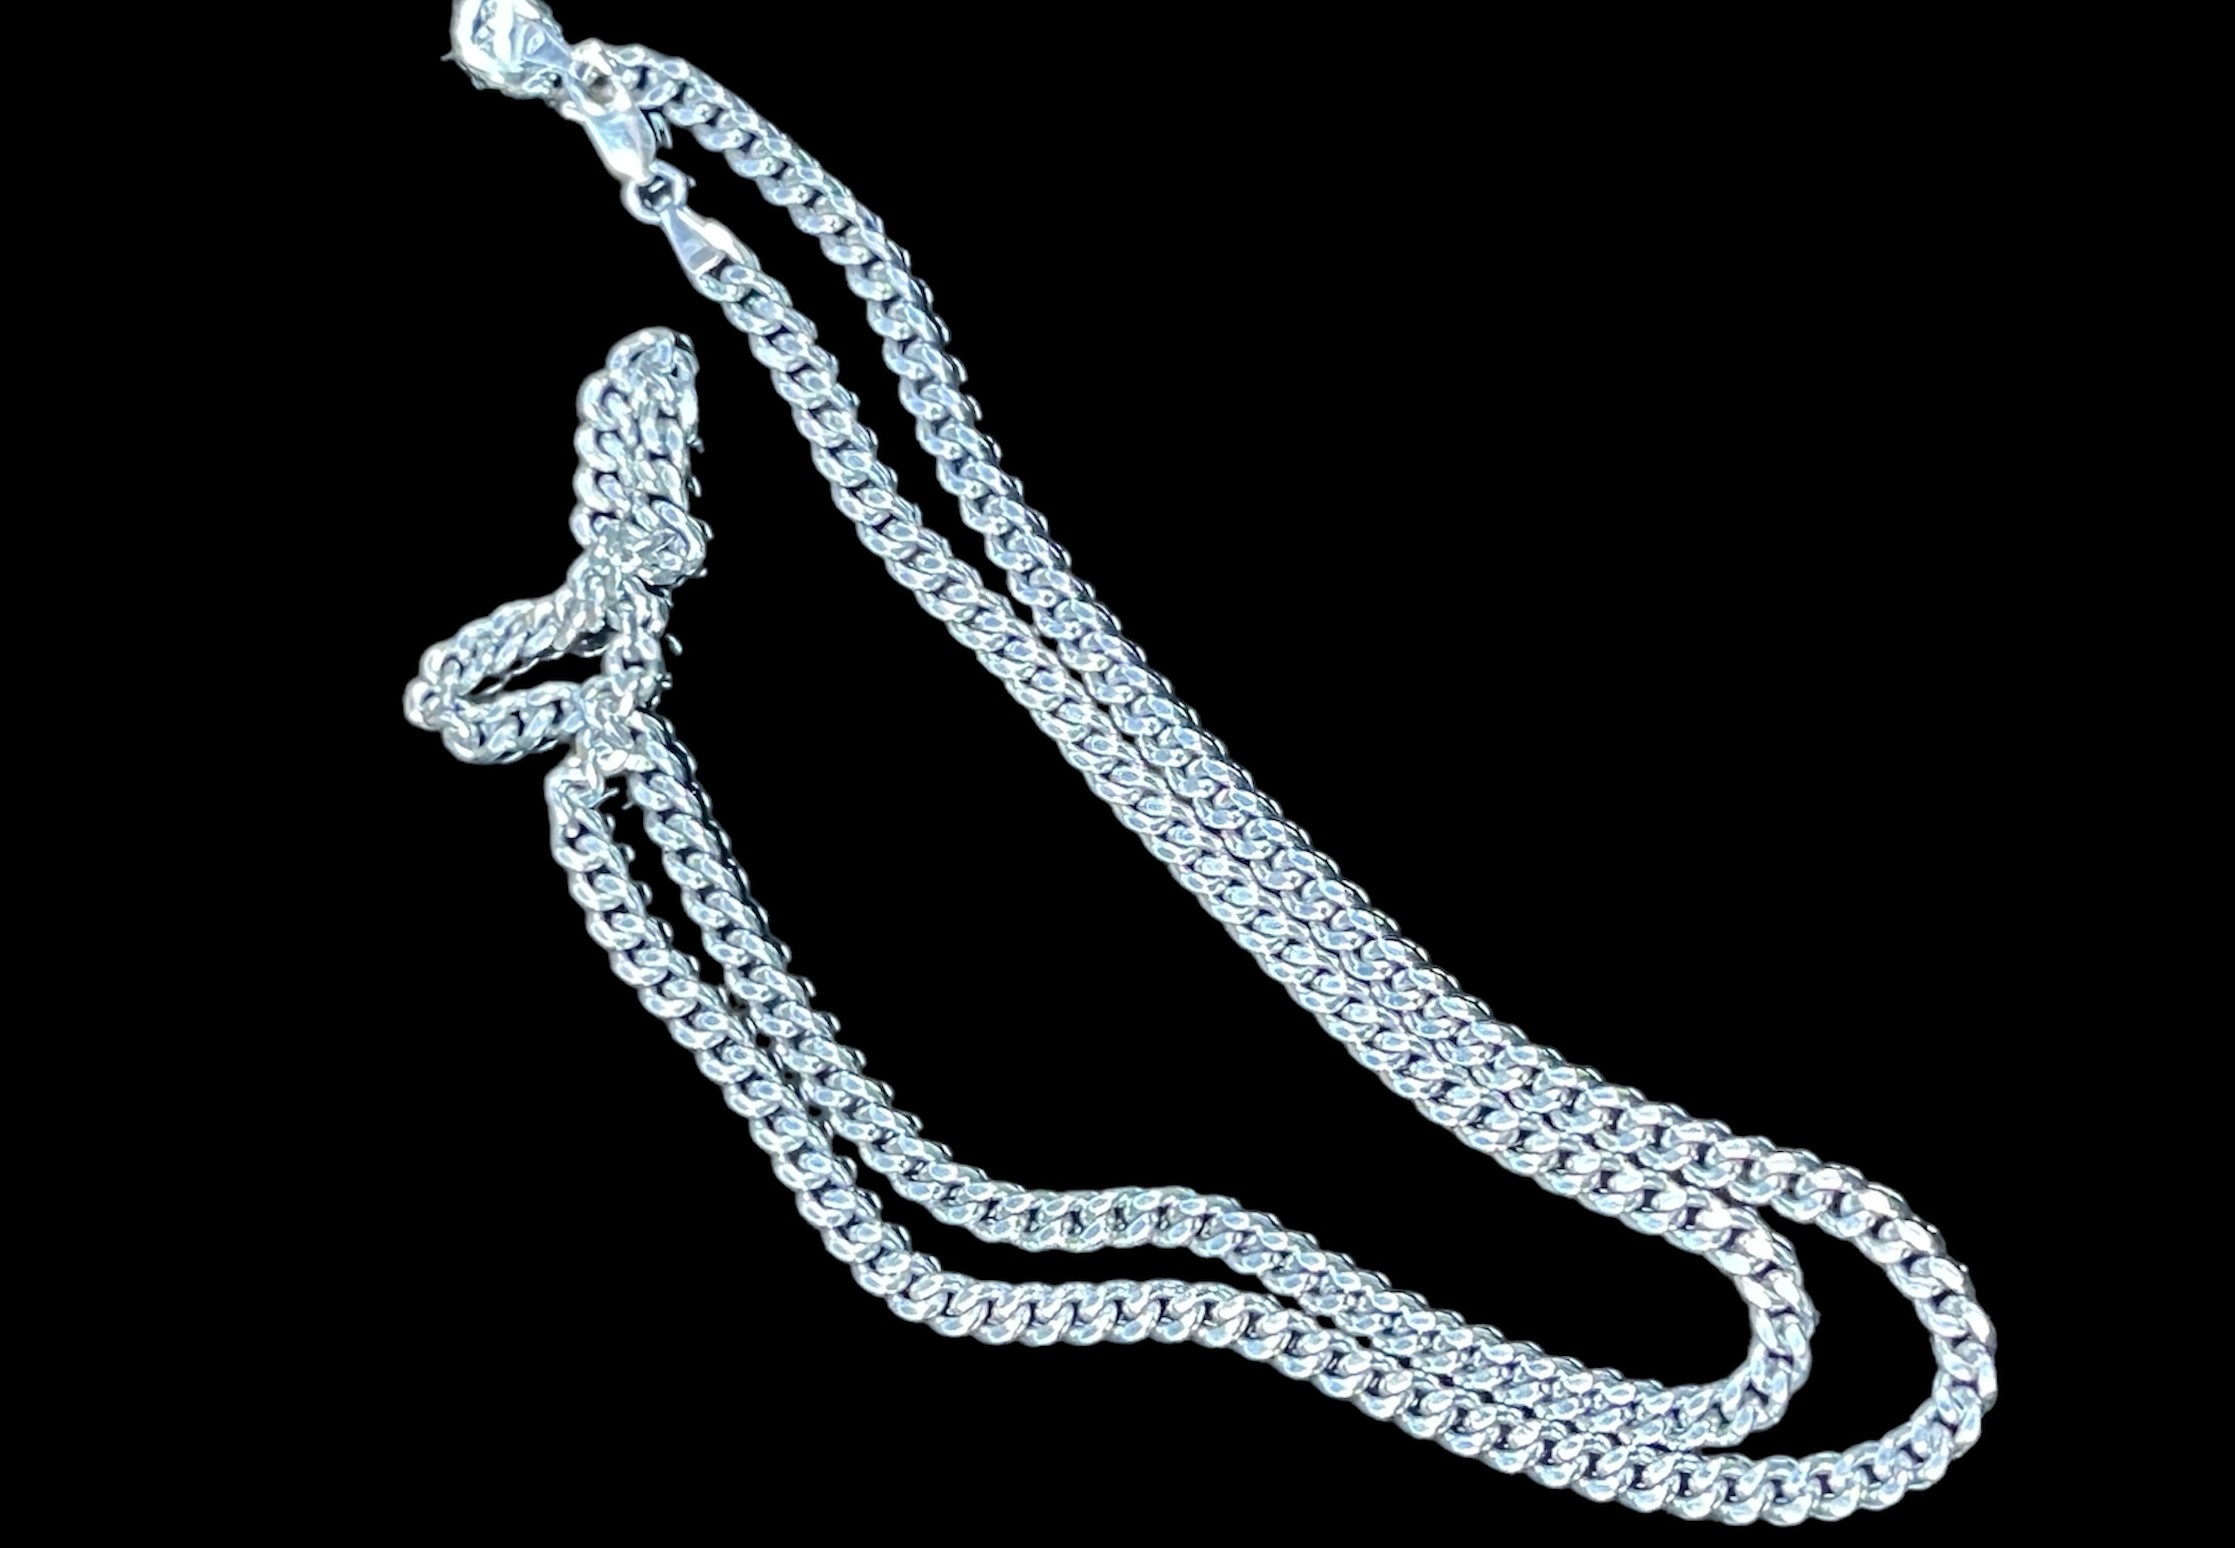 9ct white gold link chain, 27.8g